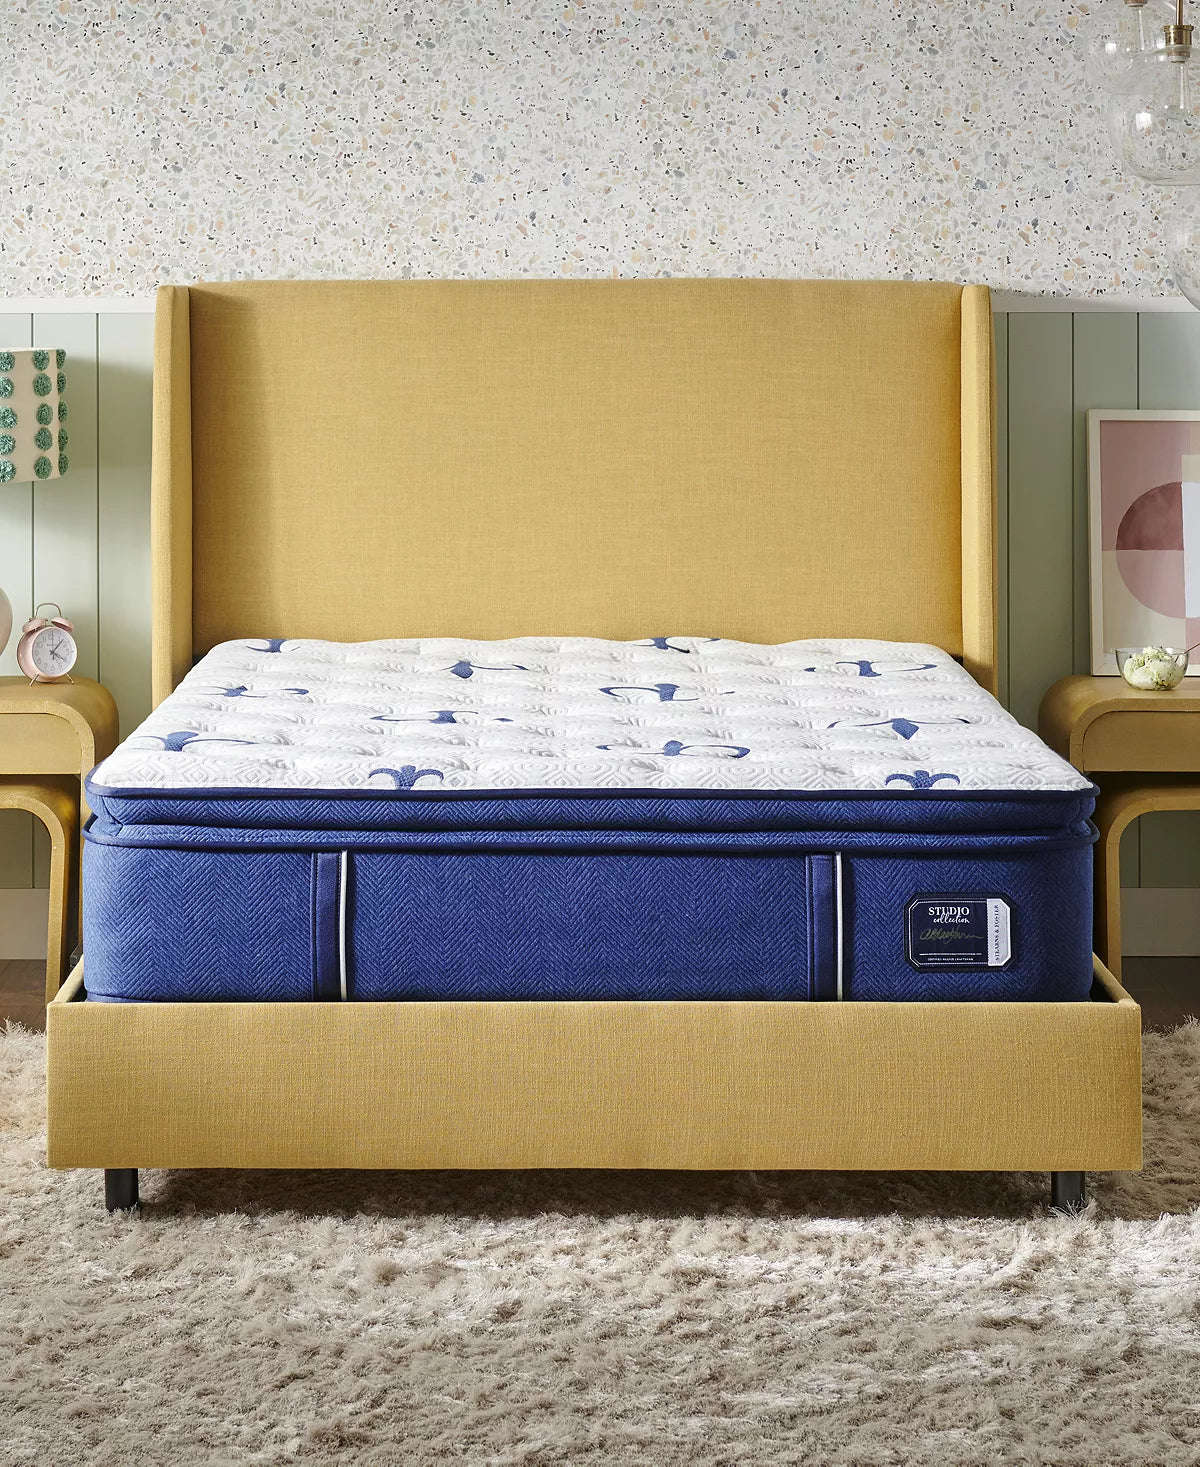 stearns and foster mattress in yellow bed frame